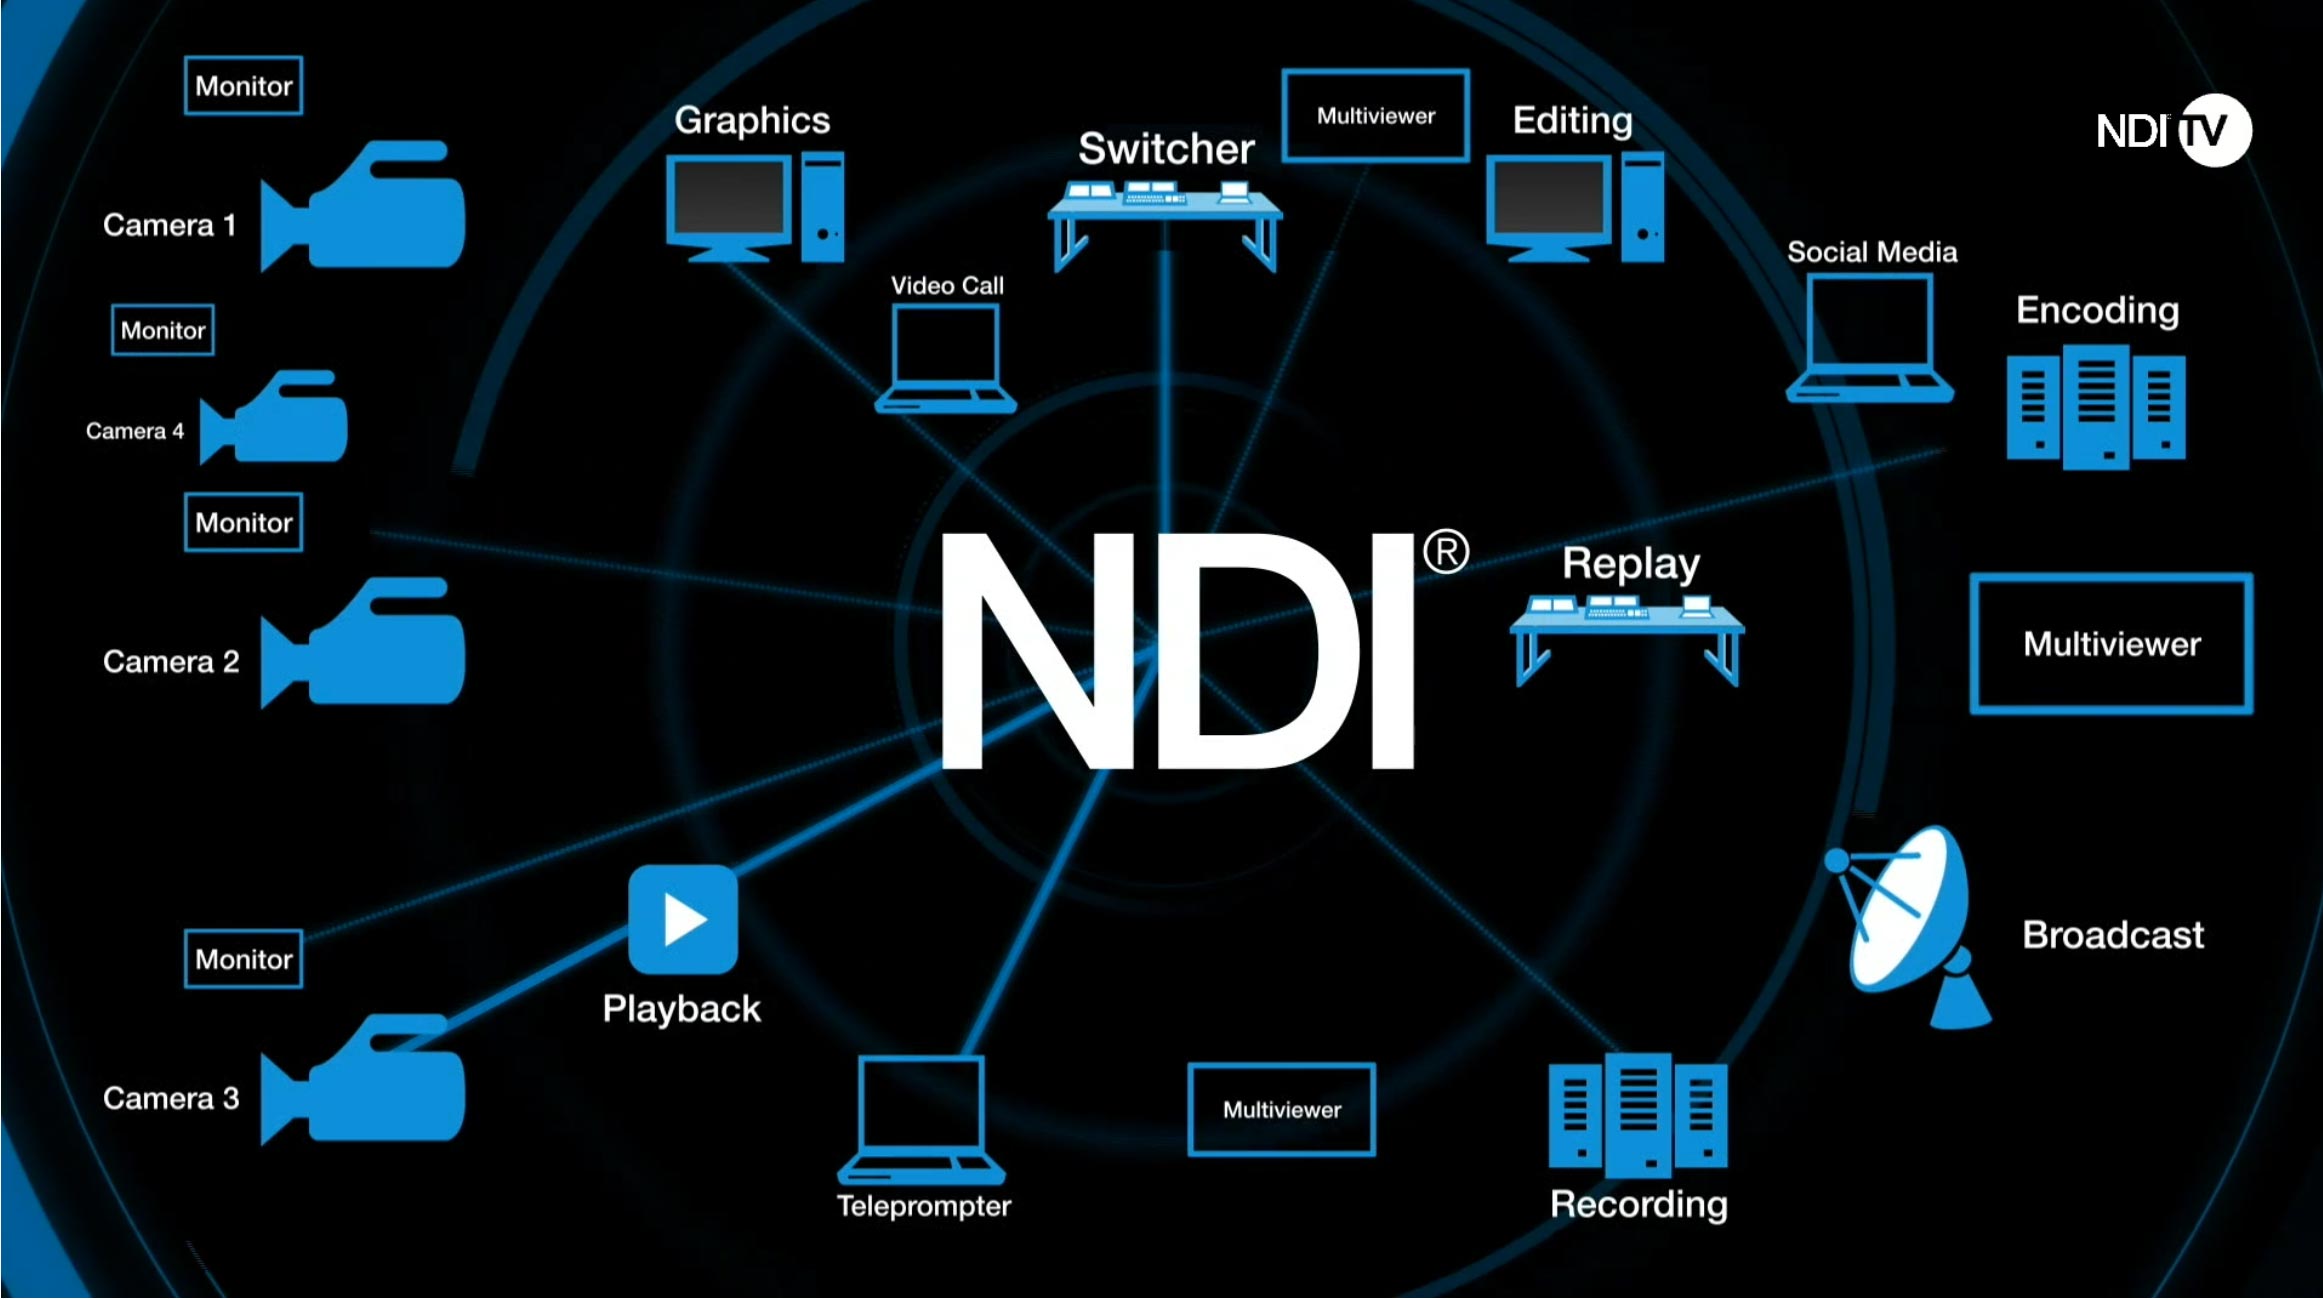 With NDI integration, Microsoft Teams is ready for video production